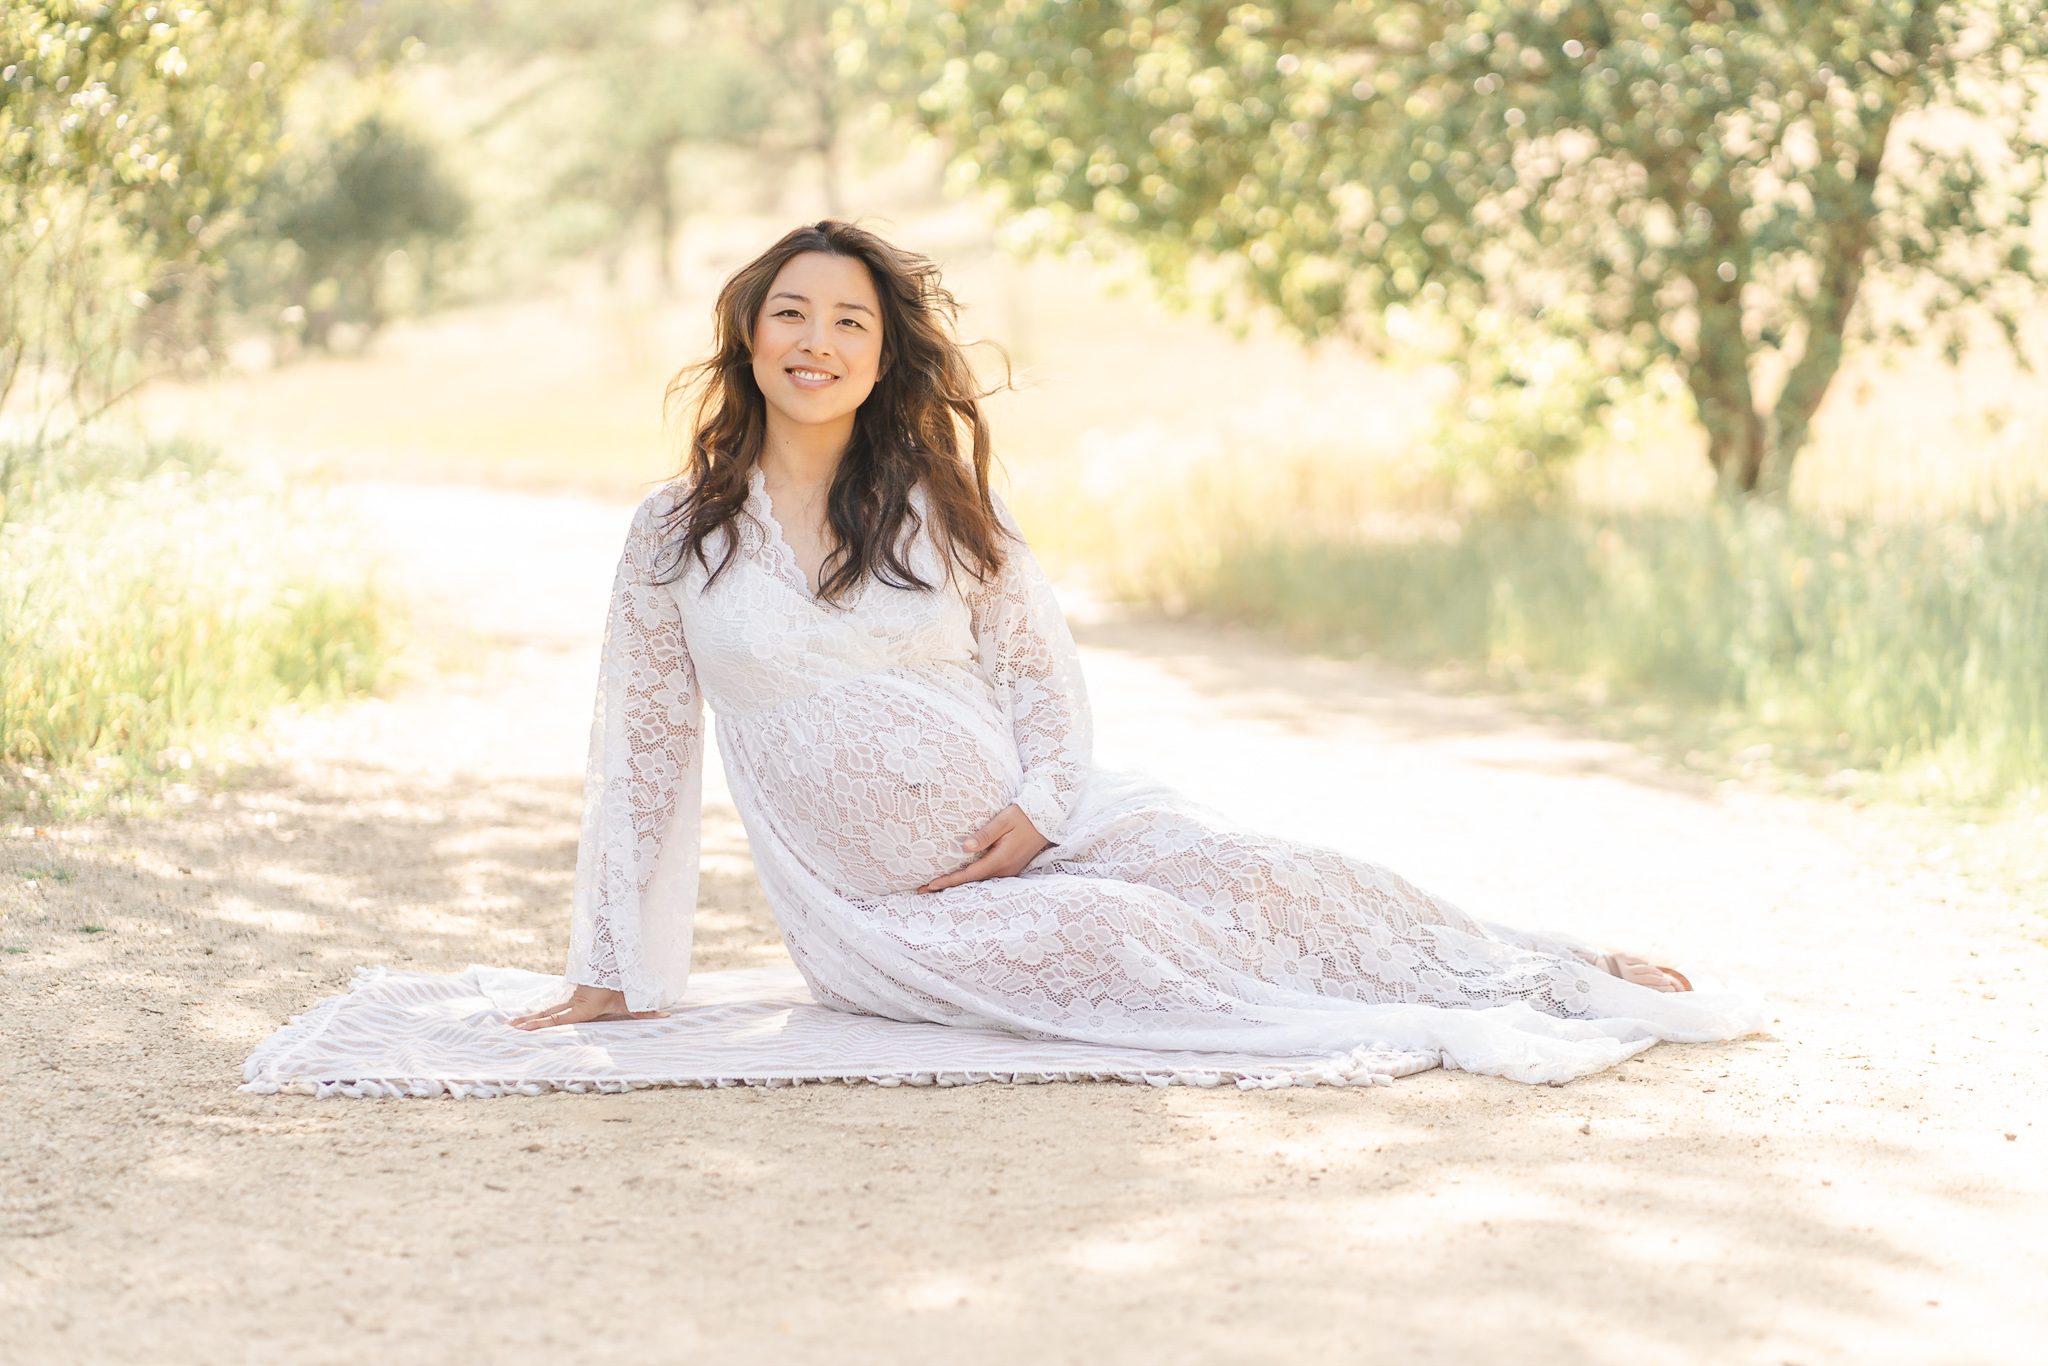 San Jose pregnant woman sitting on the ground at a park wearing a white lacy dress and smiling at the camera